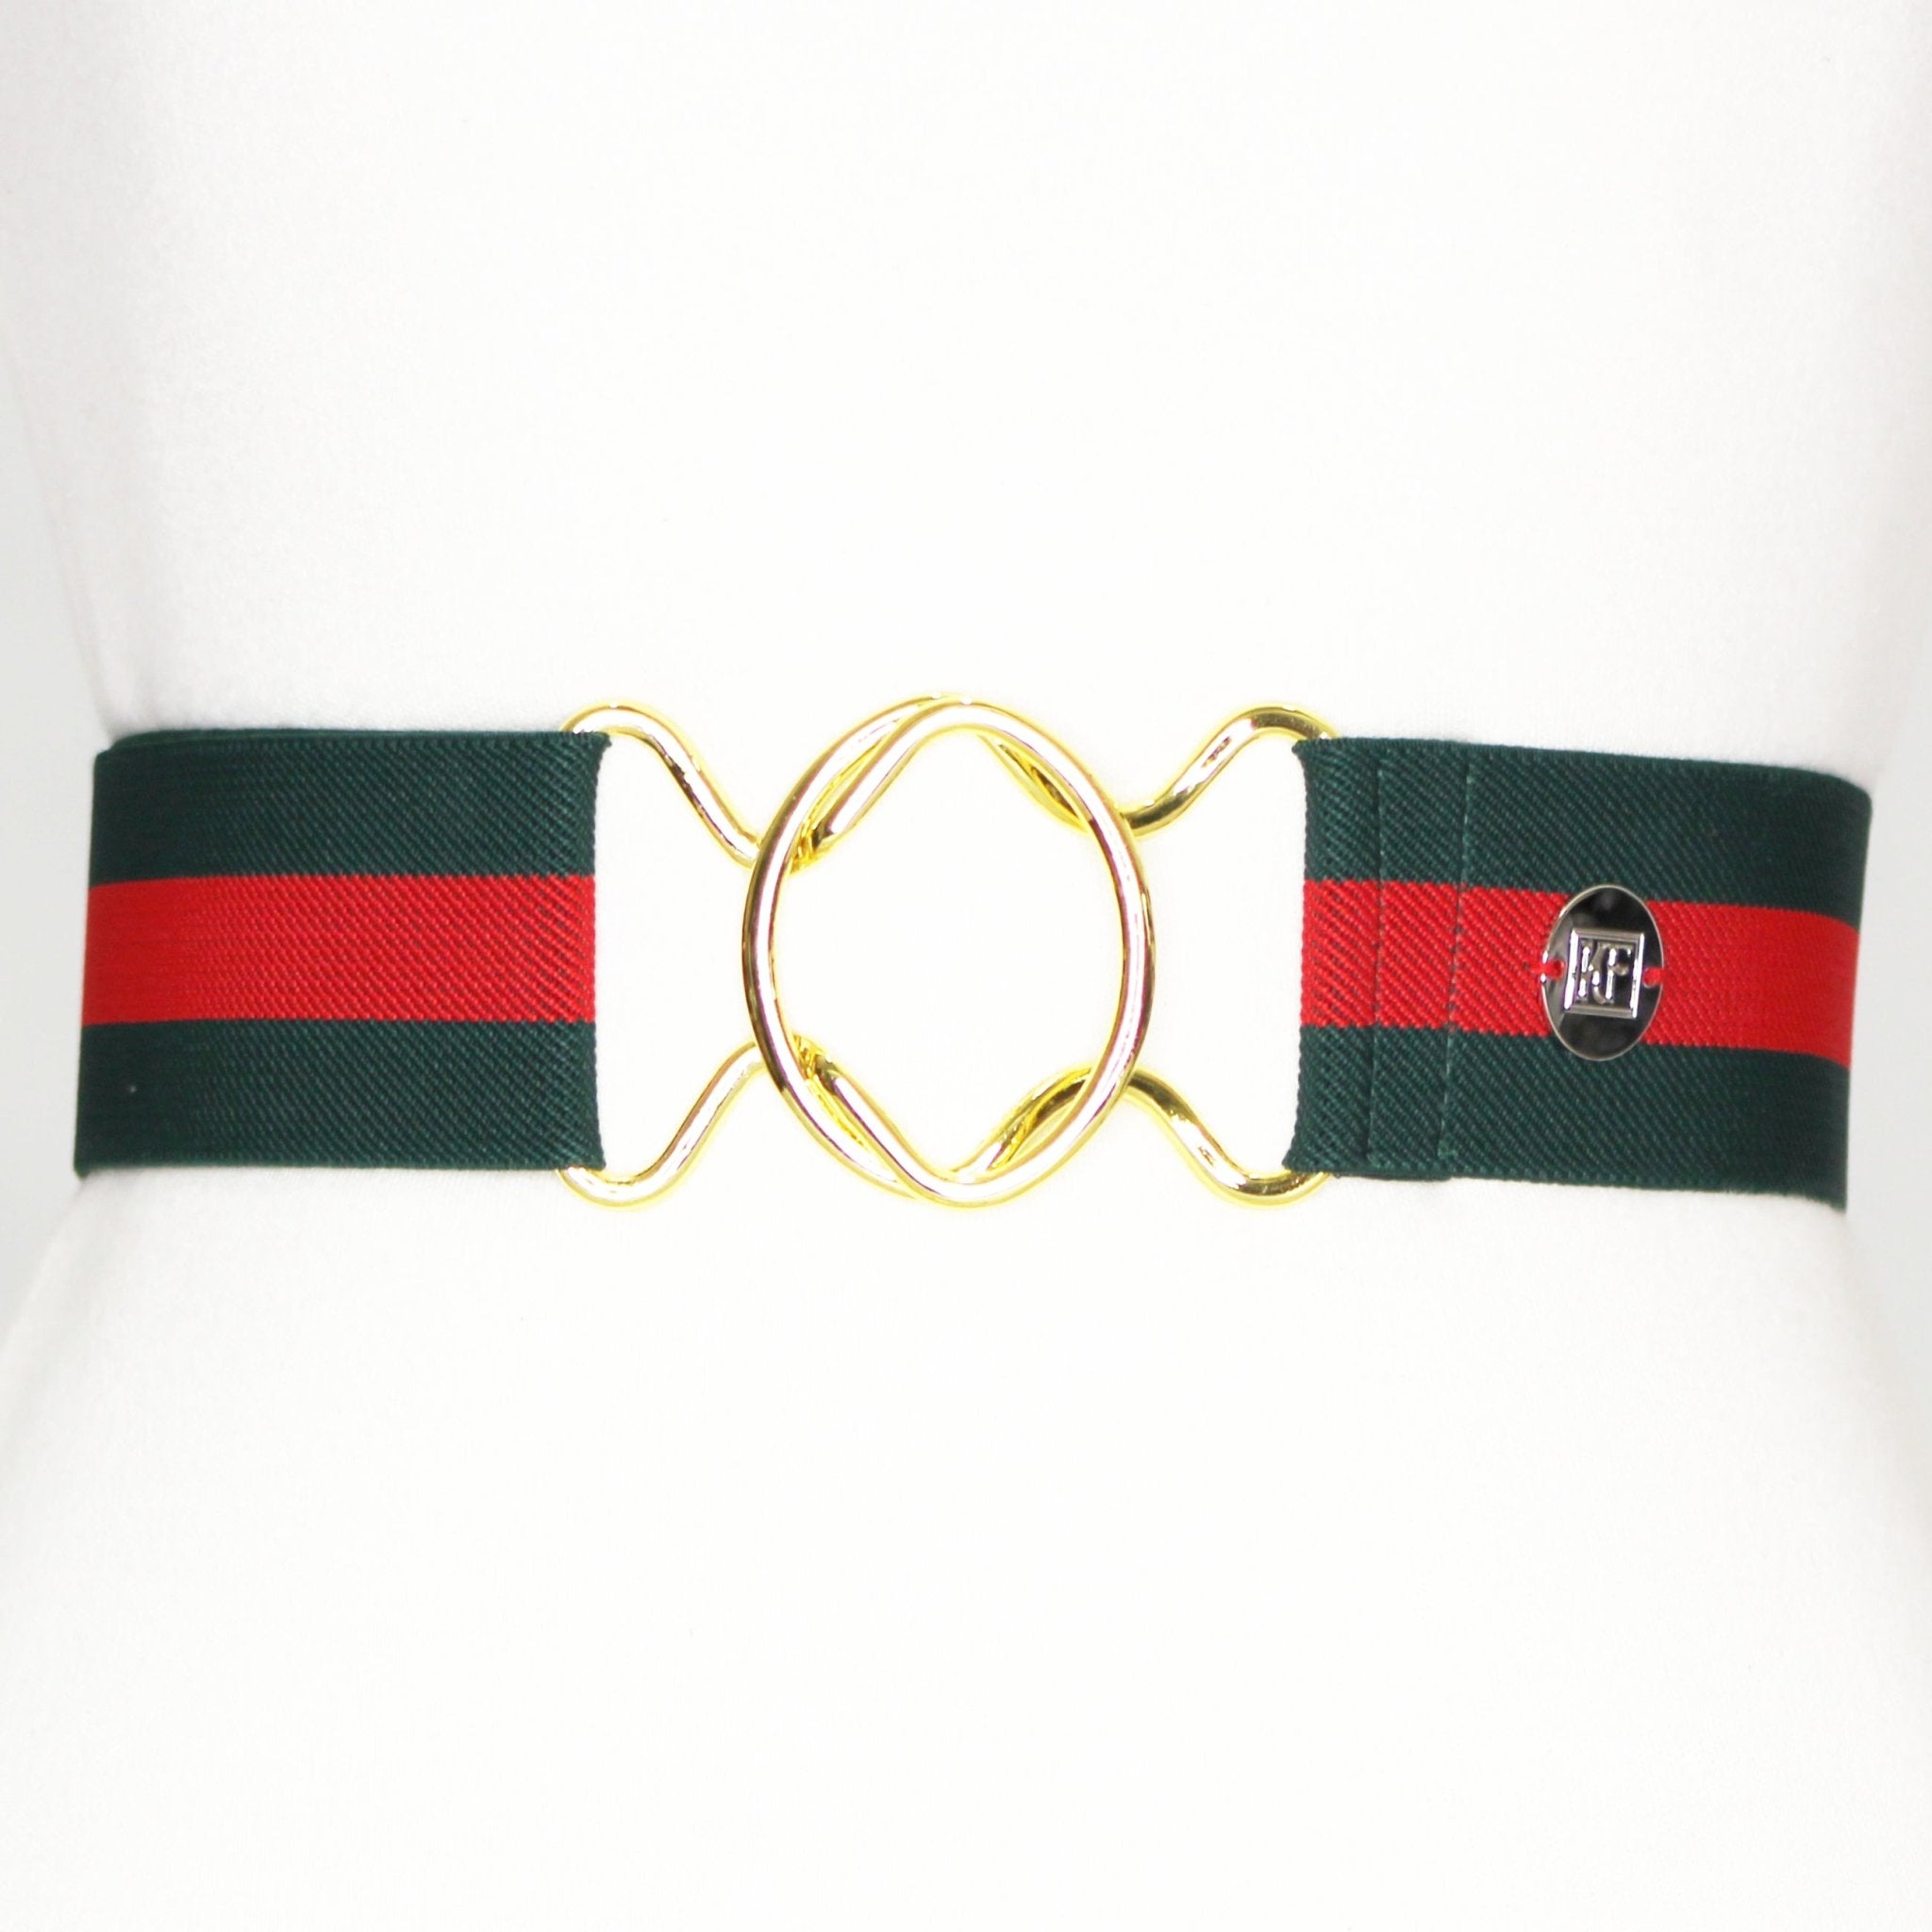 Red and Green Stripe 1.5" or 2" Riding Belt - Equiluxe Tack